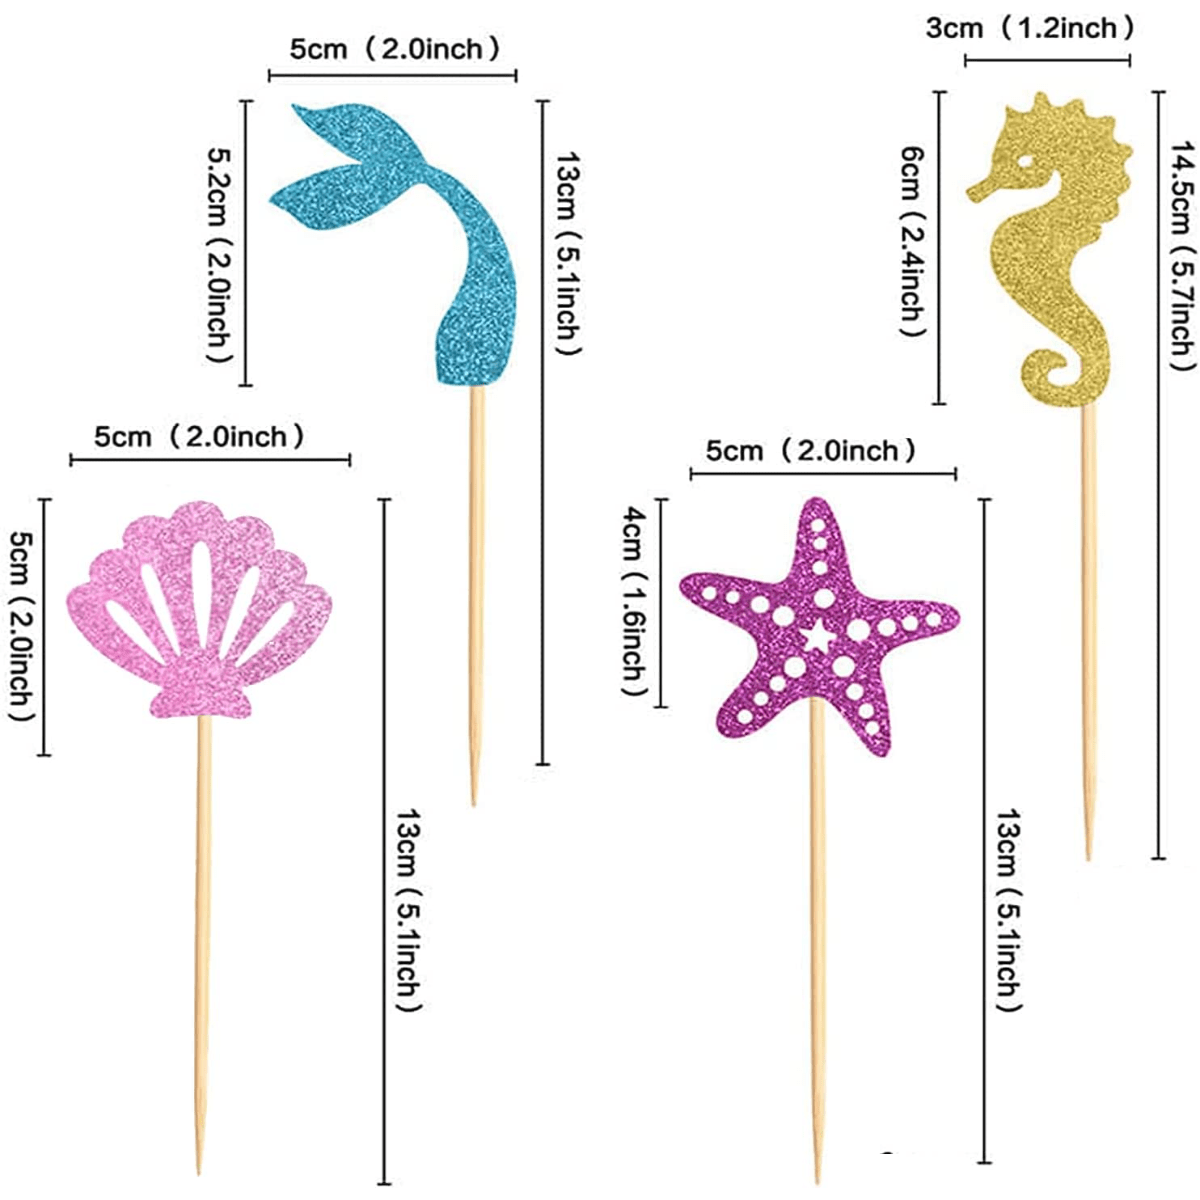 Mermaid Cupcake Topper Under the Sea Party Decorations 